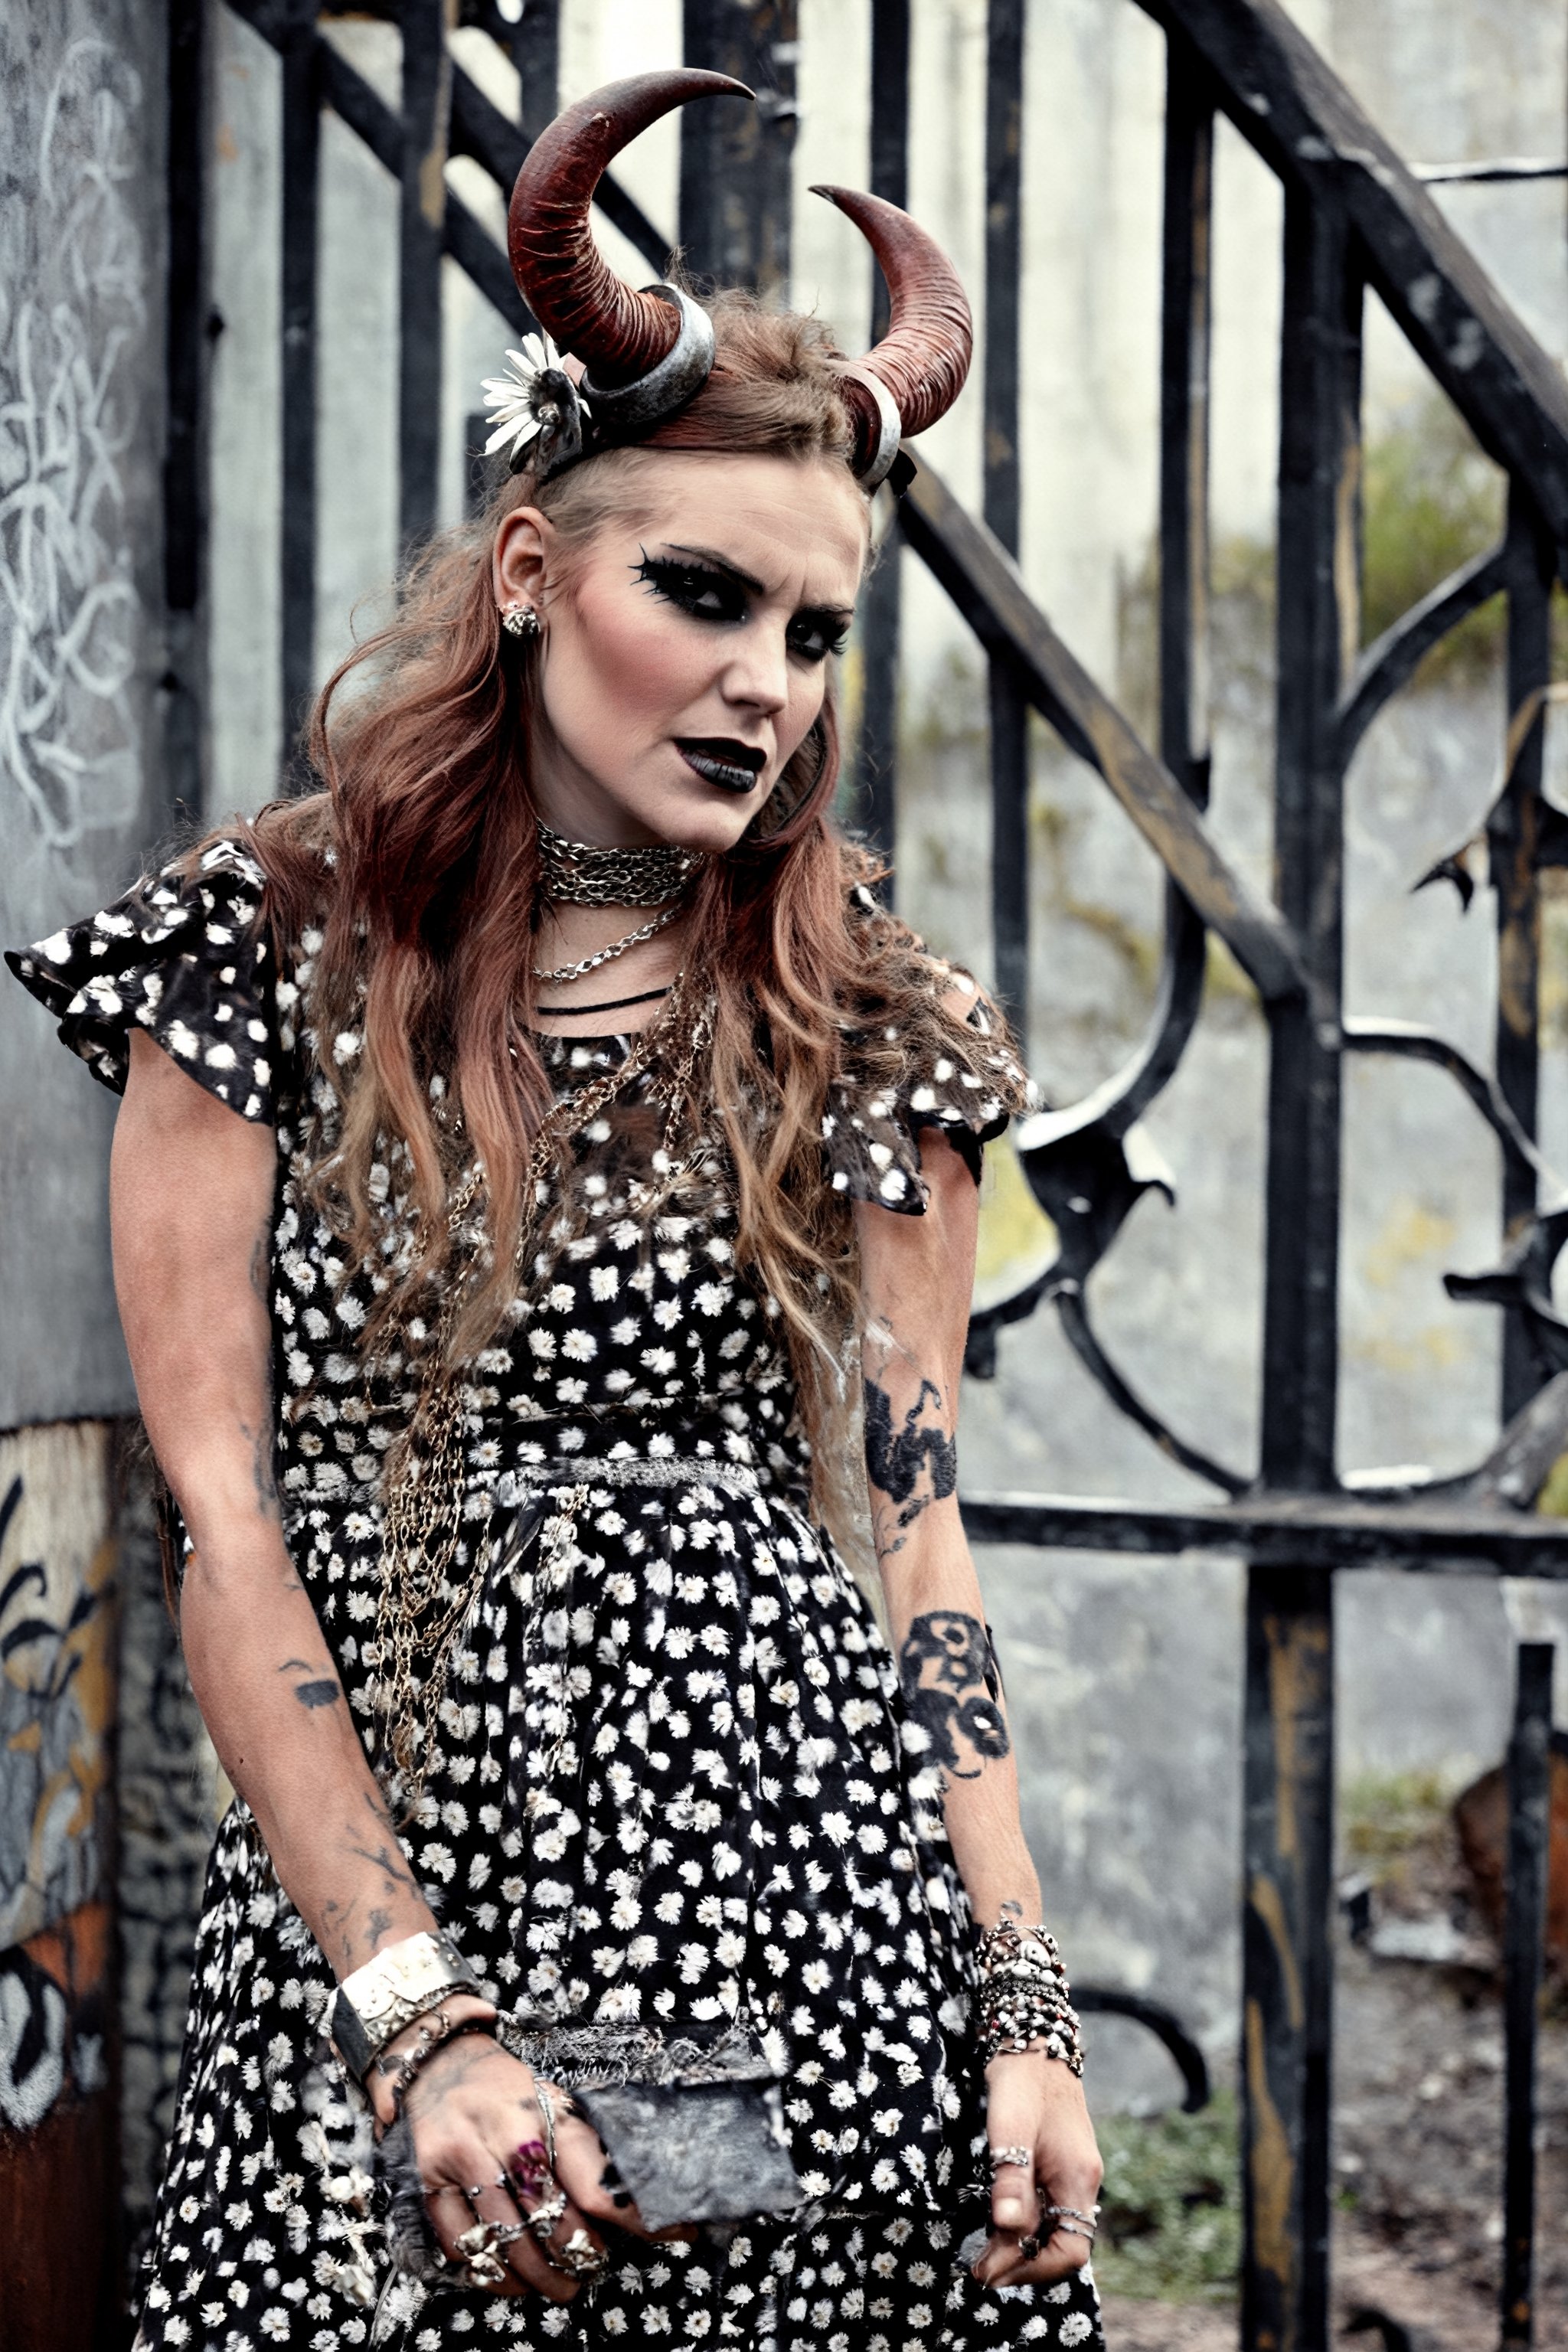 Grunge style, textured, vintage, edgy, grunge rock vibe, dirty, noisy, a girl with horns, a girl in a flower print  dress, and long oink hair laying outside, in the style of eclectic montage, black and white metalwork jewelry, flower power, gray and brown, photographic source, detailed costumes, the setting is a urban background. Street photograph, (graffiti:1.3),Realism,Epicrealism,Enhance,Details,Beautification,Landskaper,photo r3al